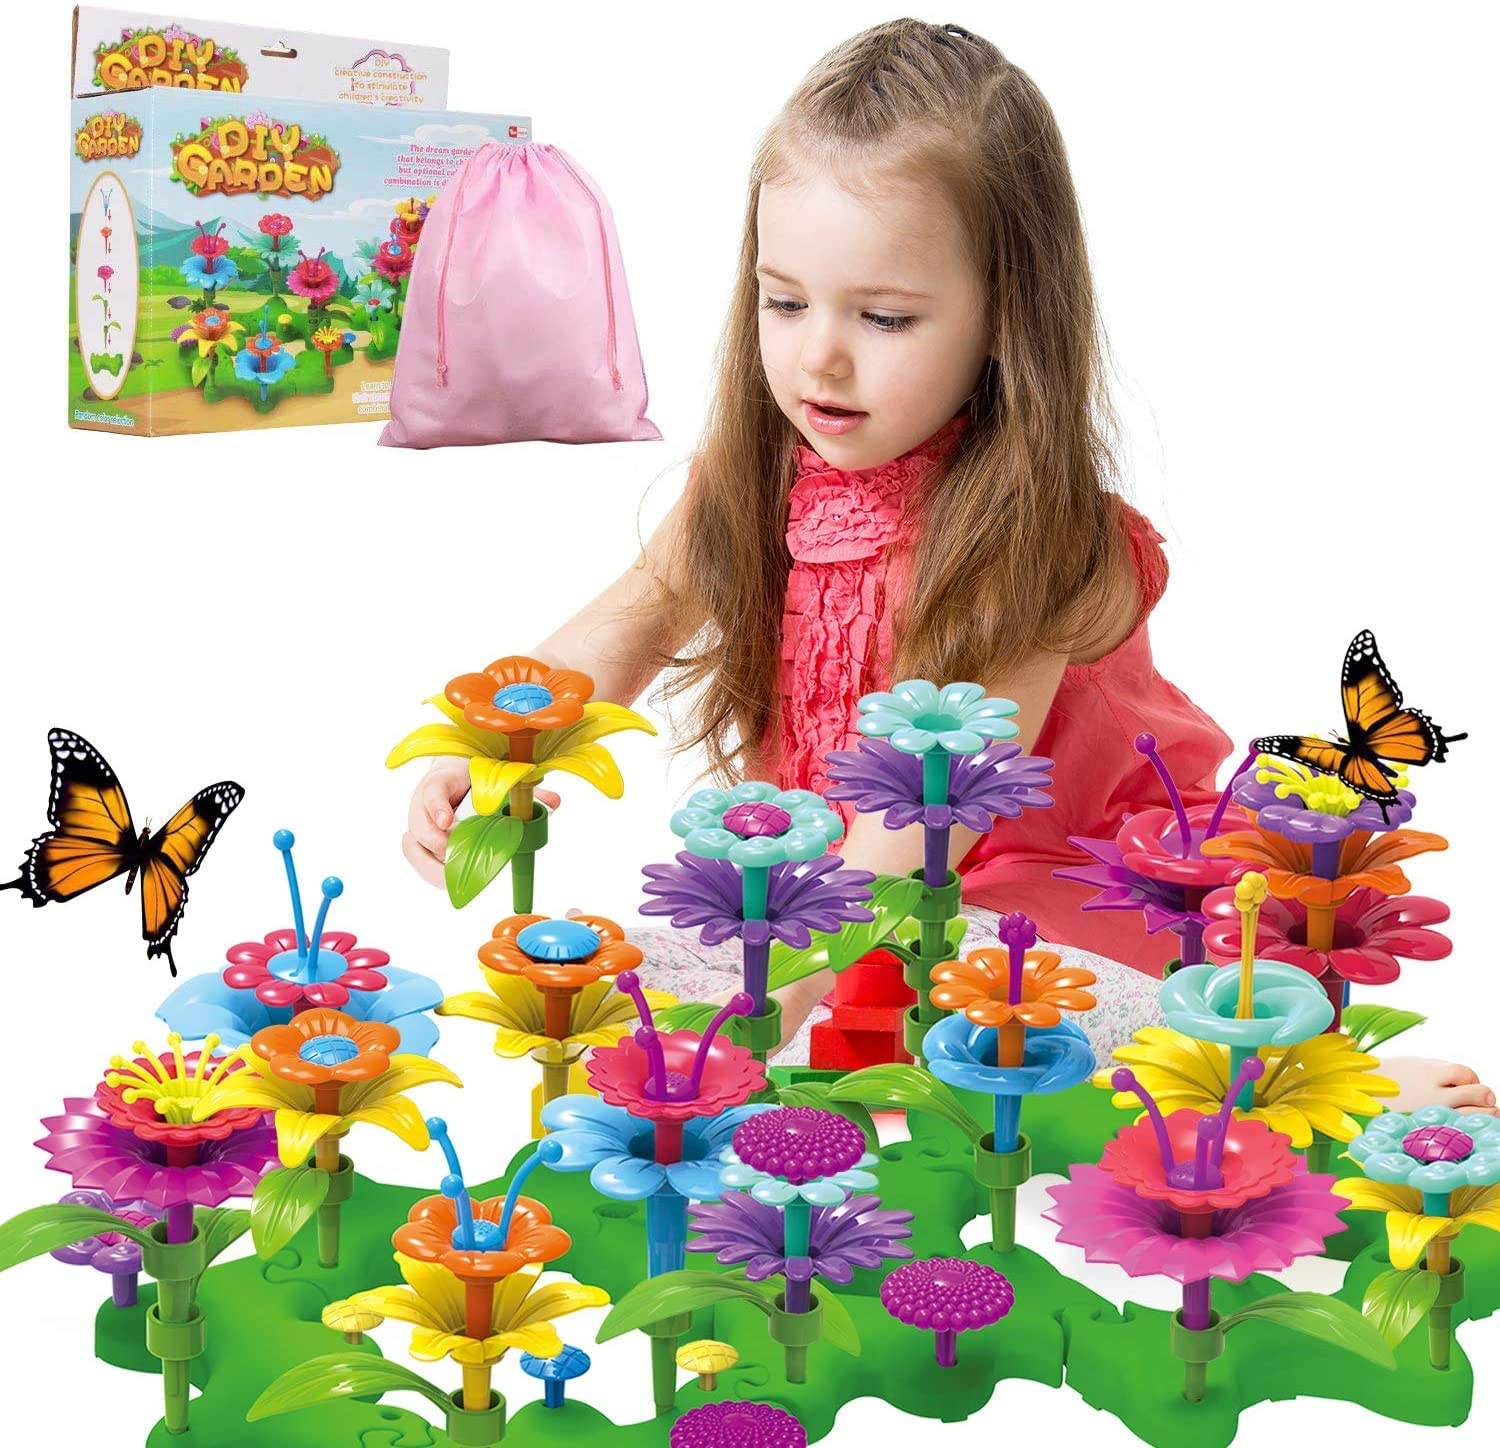 Educational Stem Toy Pretend Gardening Gifts for Birthday Christmas Flower Garden Building Toys 120 Pcs Build A Garden Toy Set for Girls Kids Age 3 4 5 6 7 Year Old Toddlers Boys 